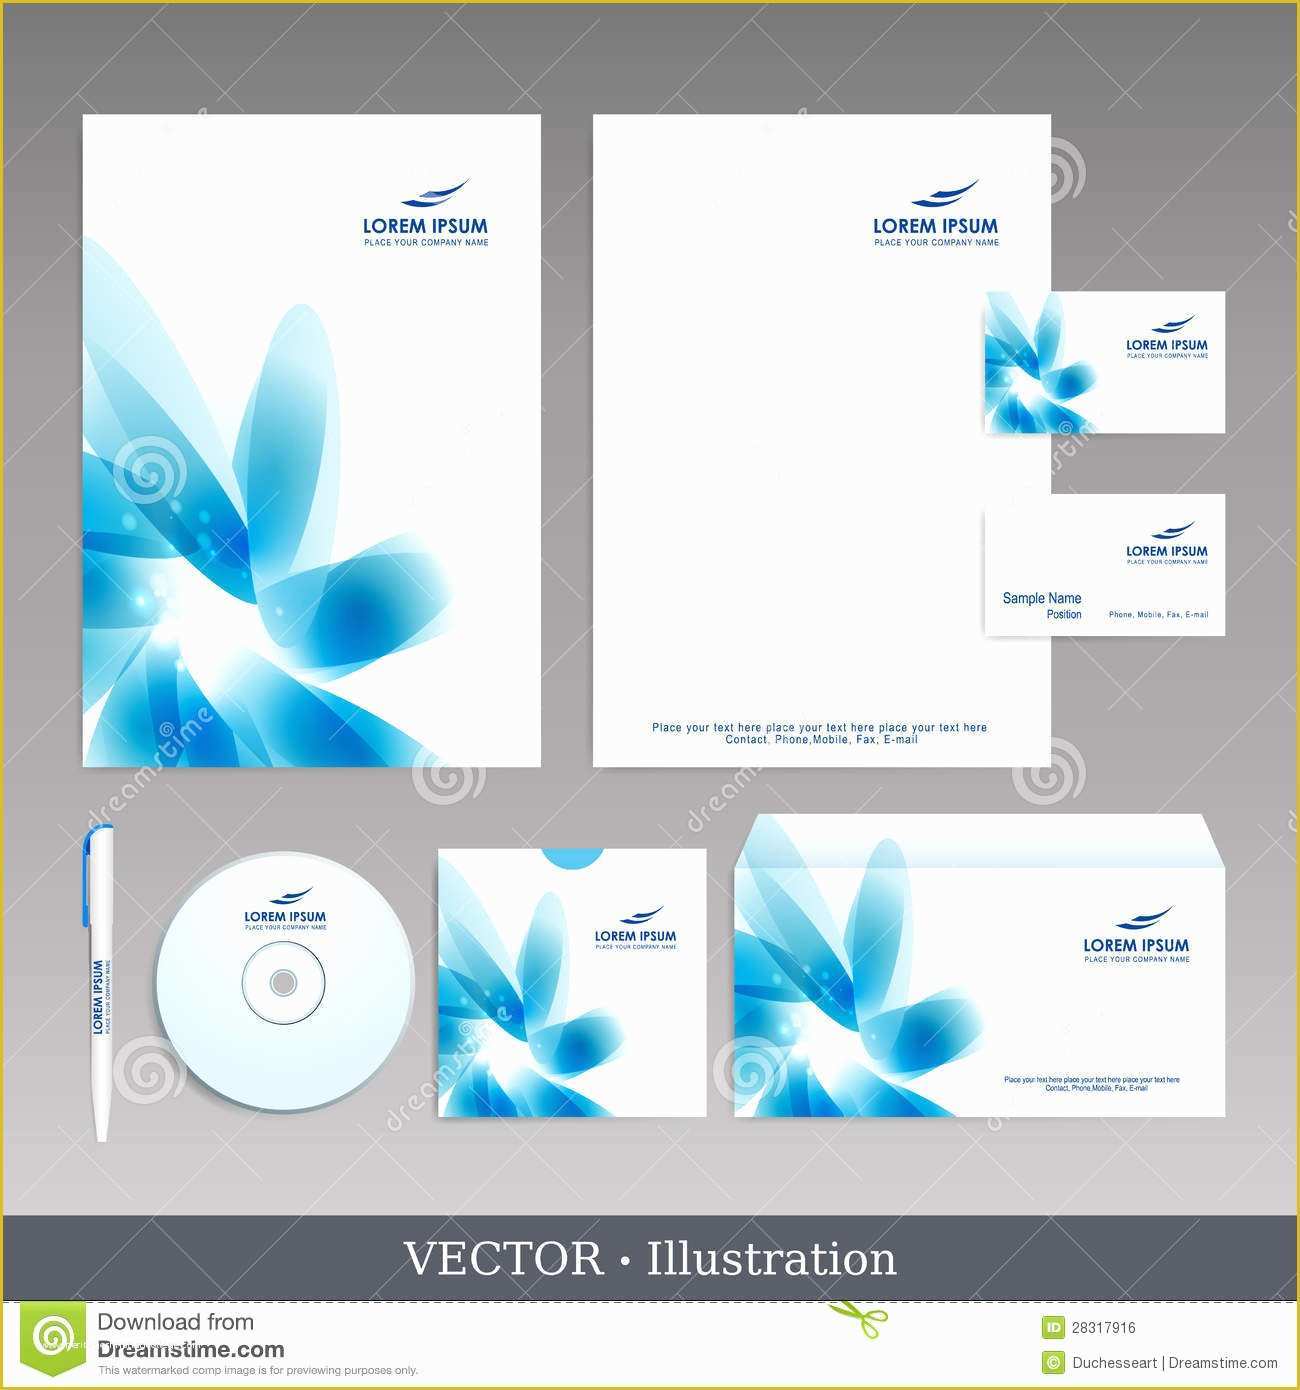 id-card-design-template-free-download-of-editable-id-card-template-free-download-templates-data